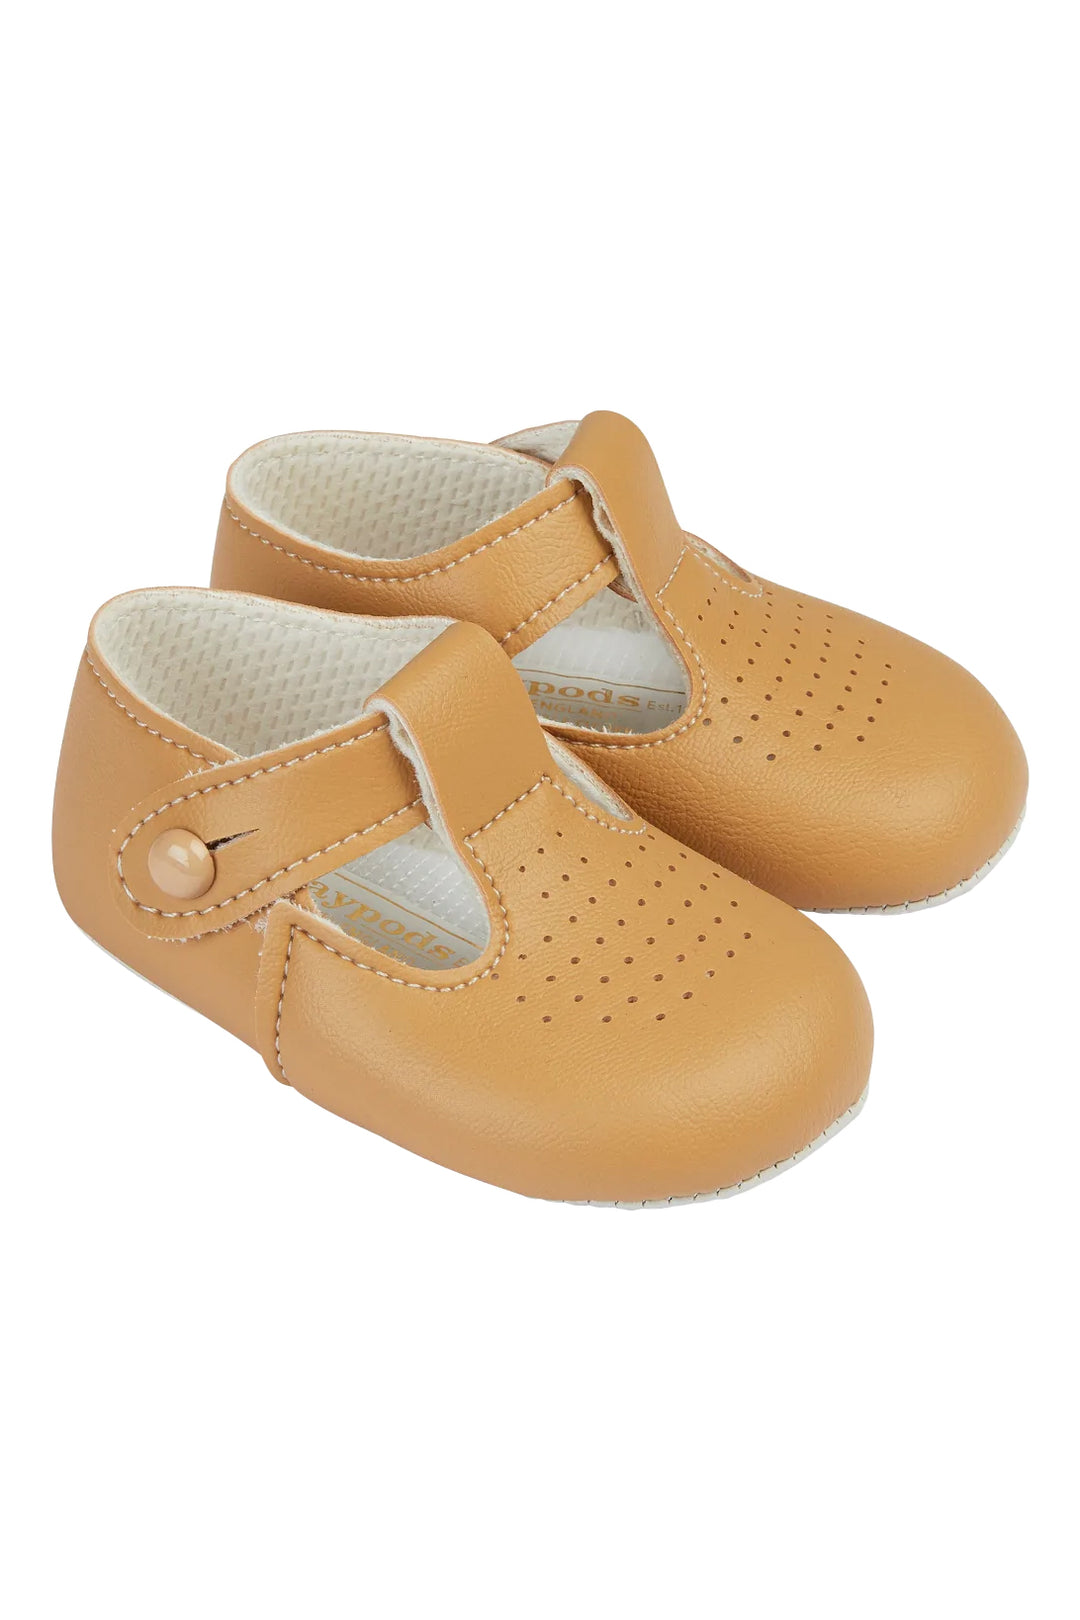 Baypods Camel T-Bar Soft Sole Shoes | iphoneandroidapplications